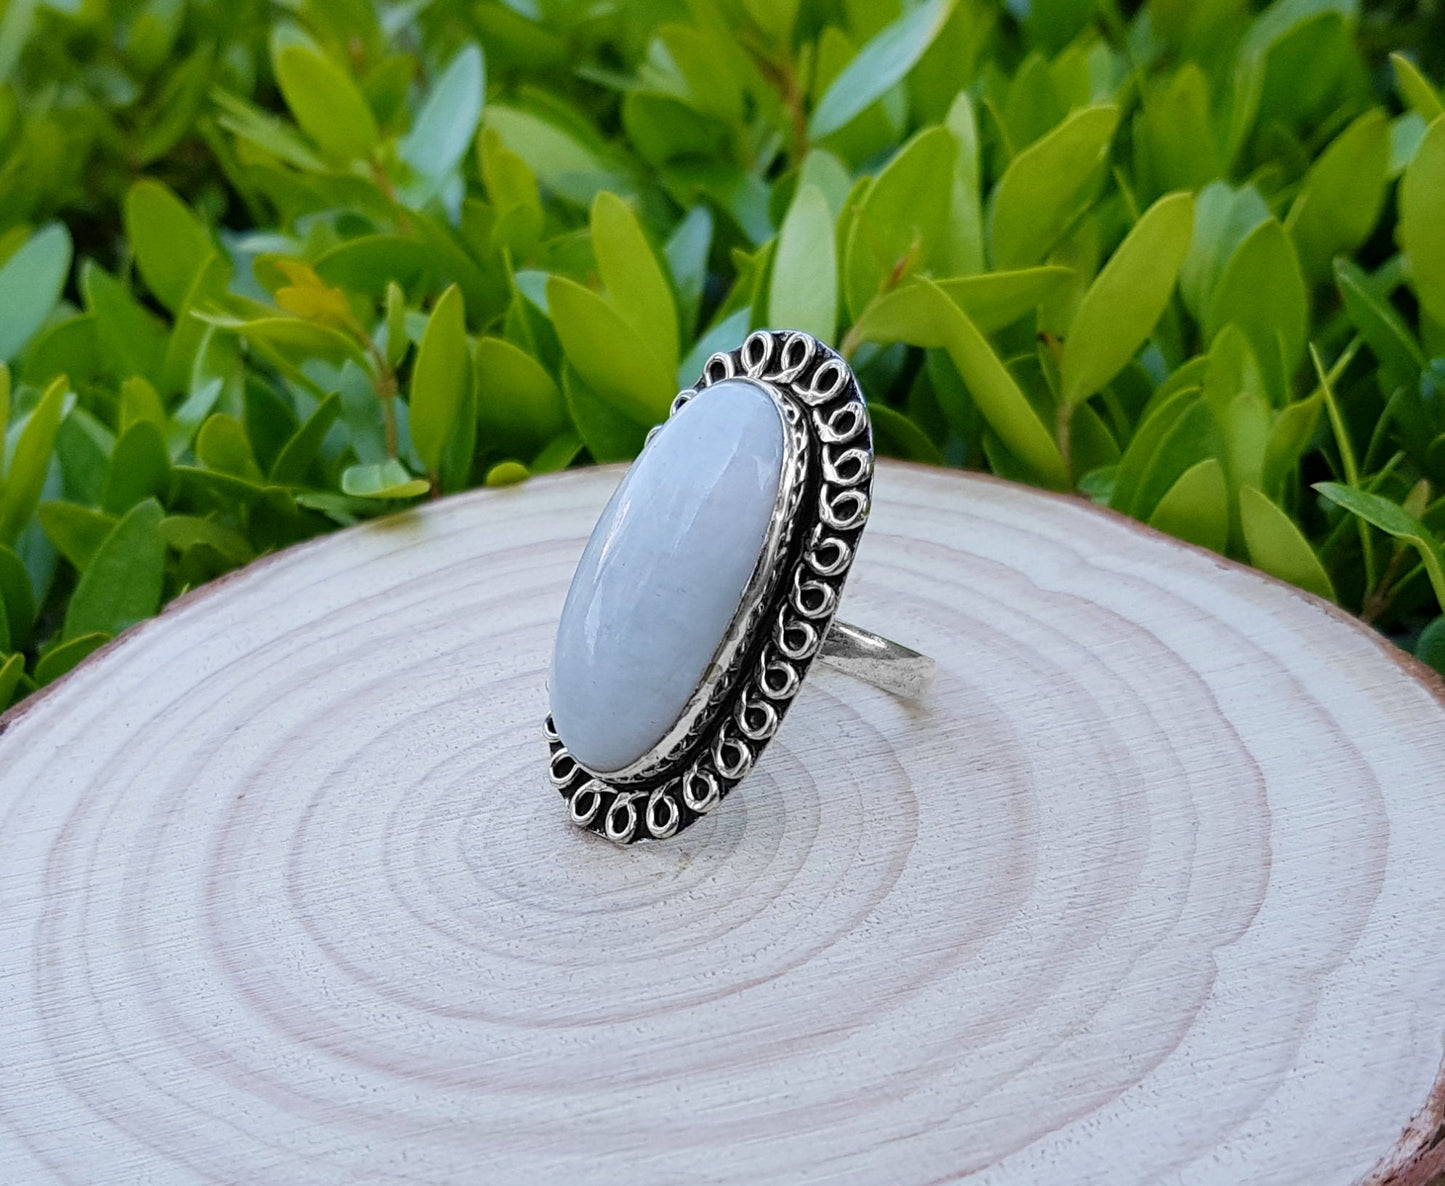 Rainbow Moonstone Ring In Sterling Silver Size US 8 Boho Crystal Ring Gemstone Ring GypsyJewelry One Of A Kind Gift For Women